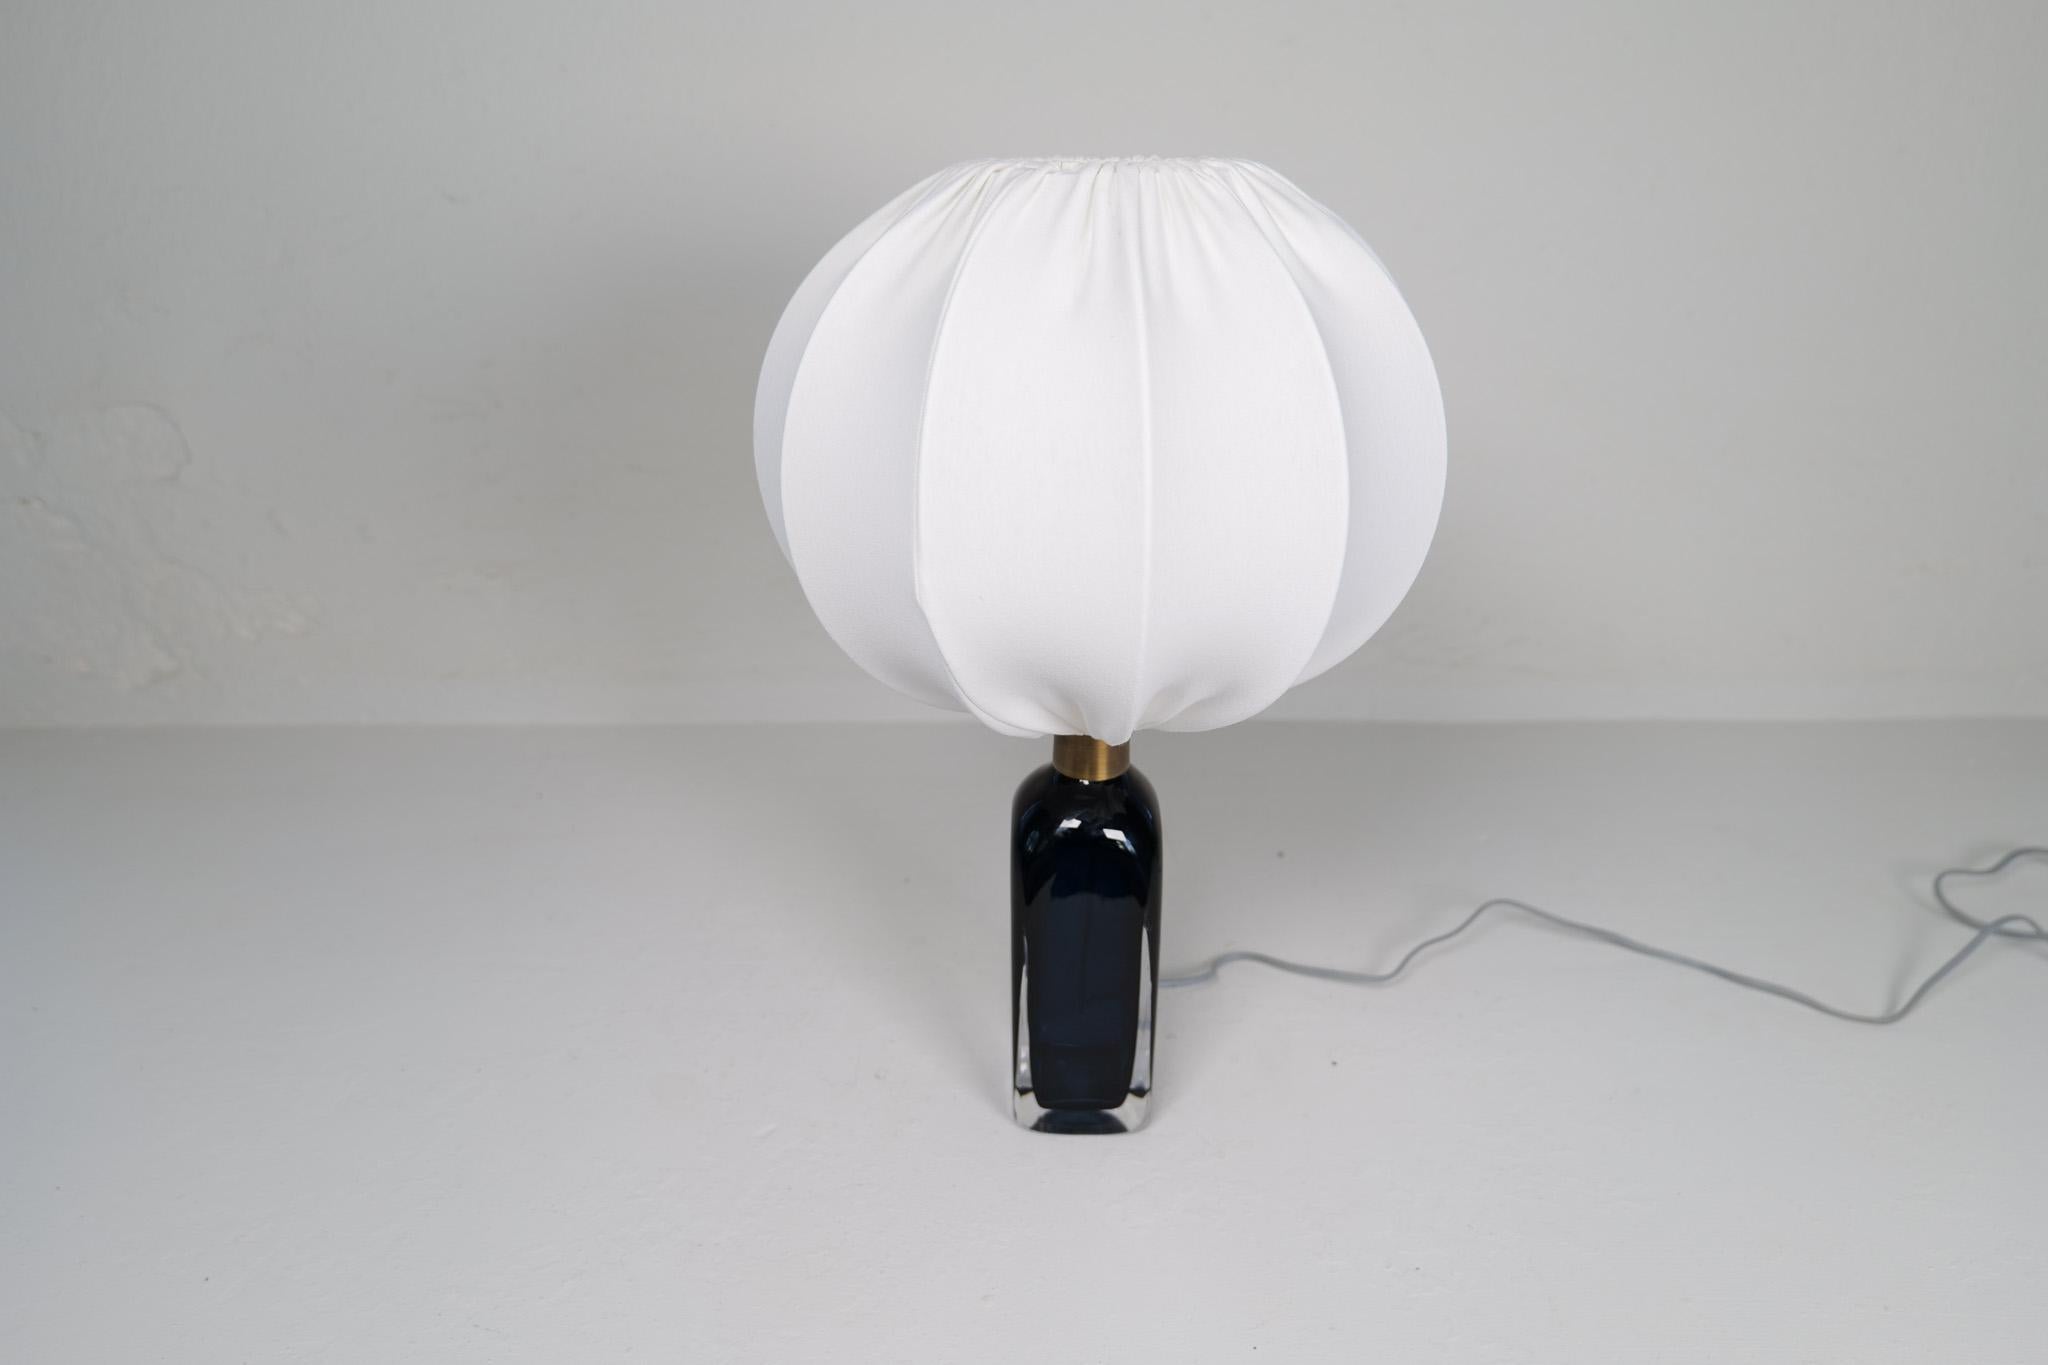 Crystal Midcentury Modern Table Lamp by Carl Fagerlund for Orrefors Sweden RD 1406 For Sale